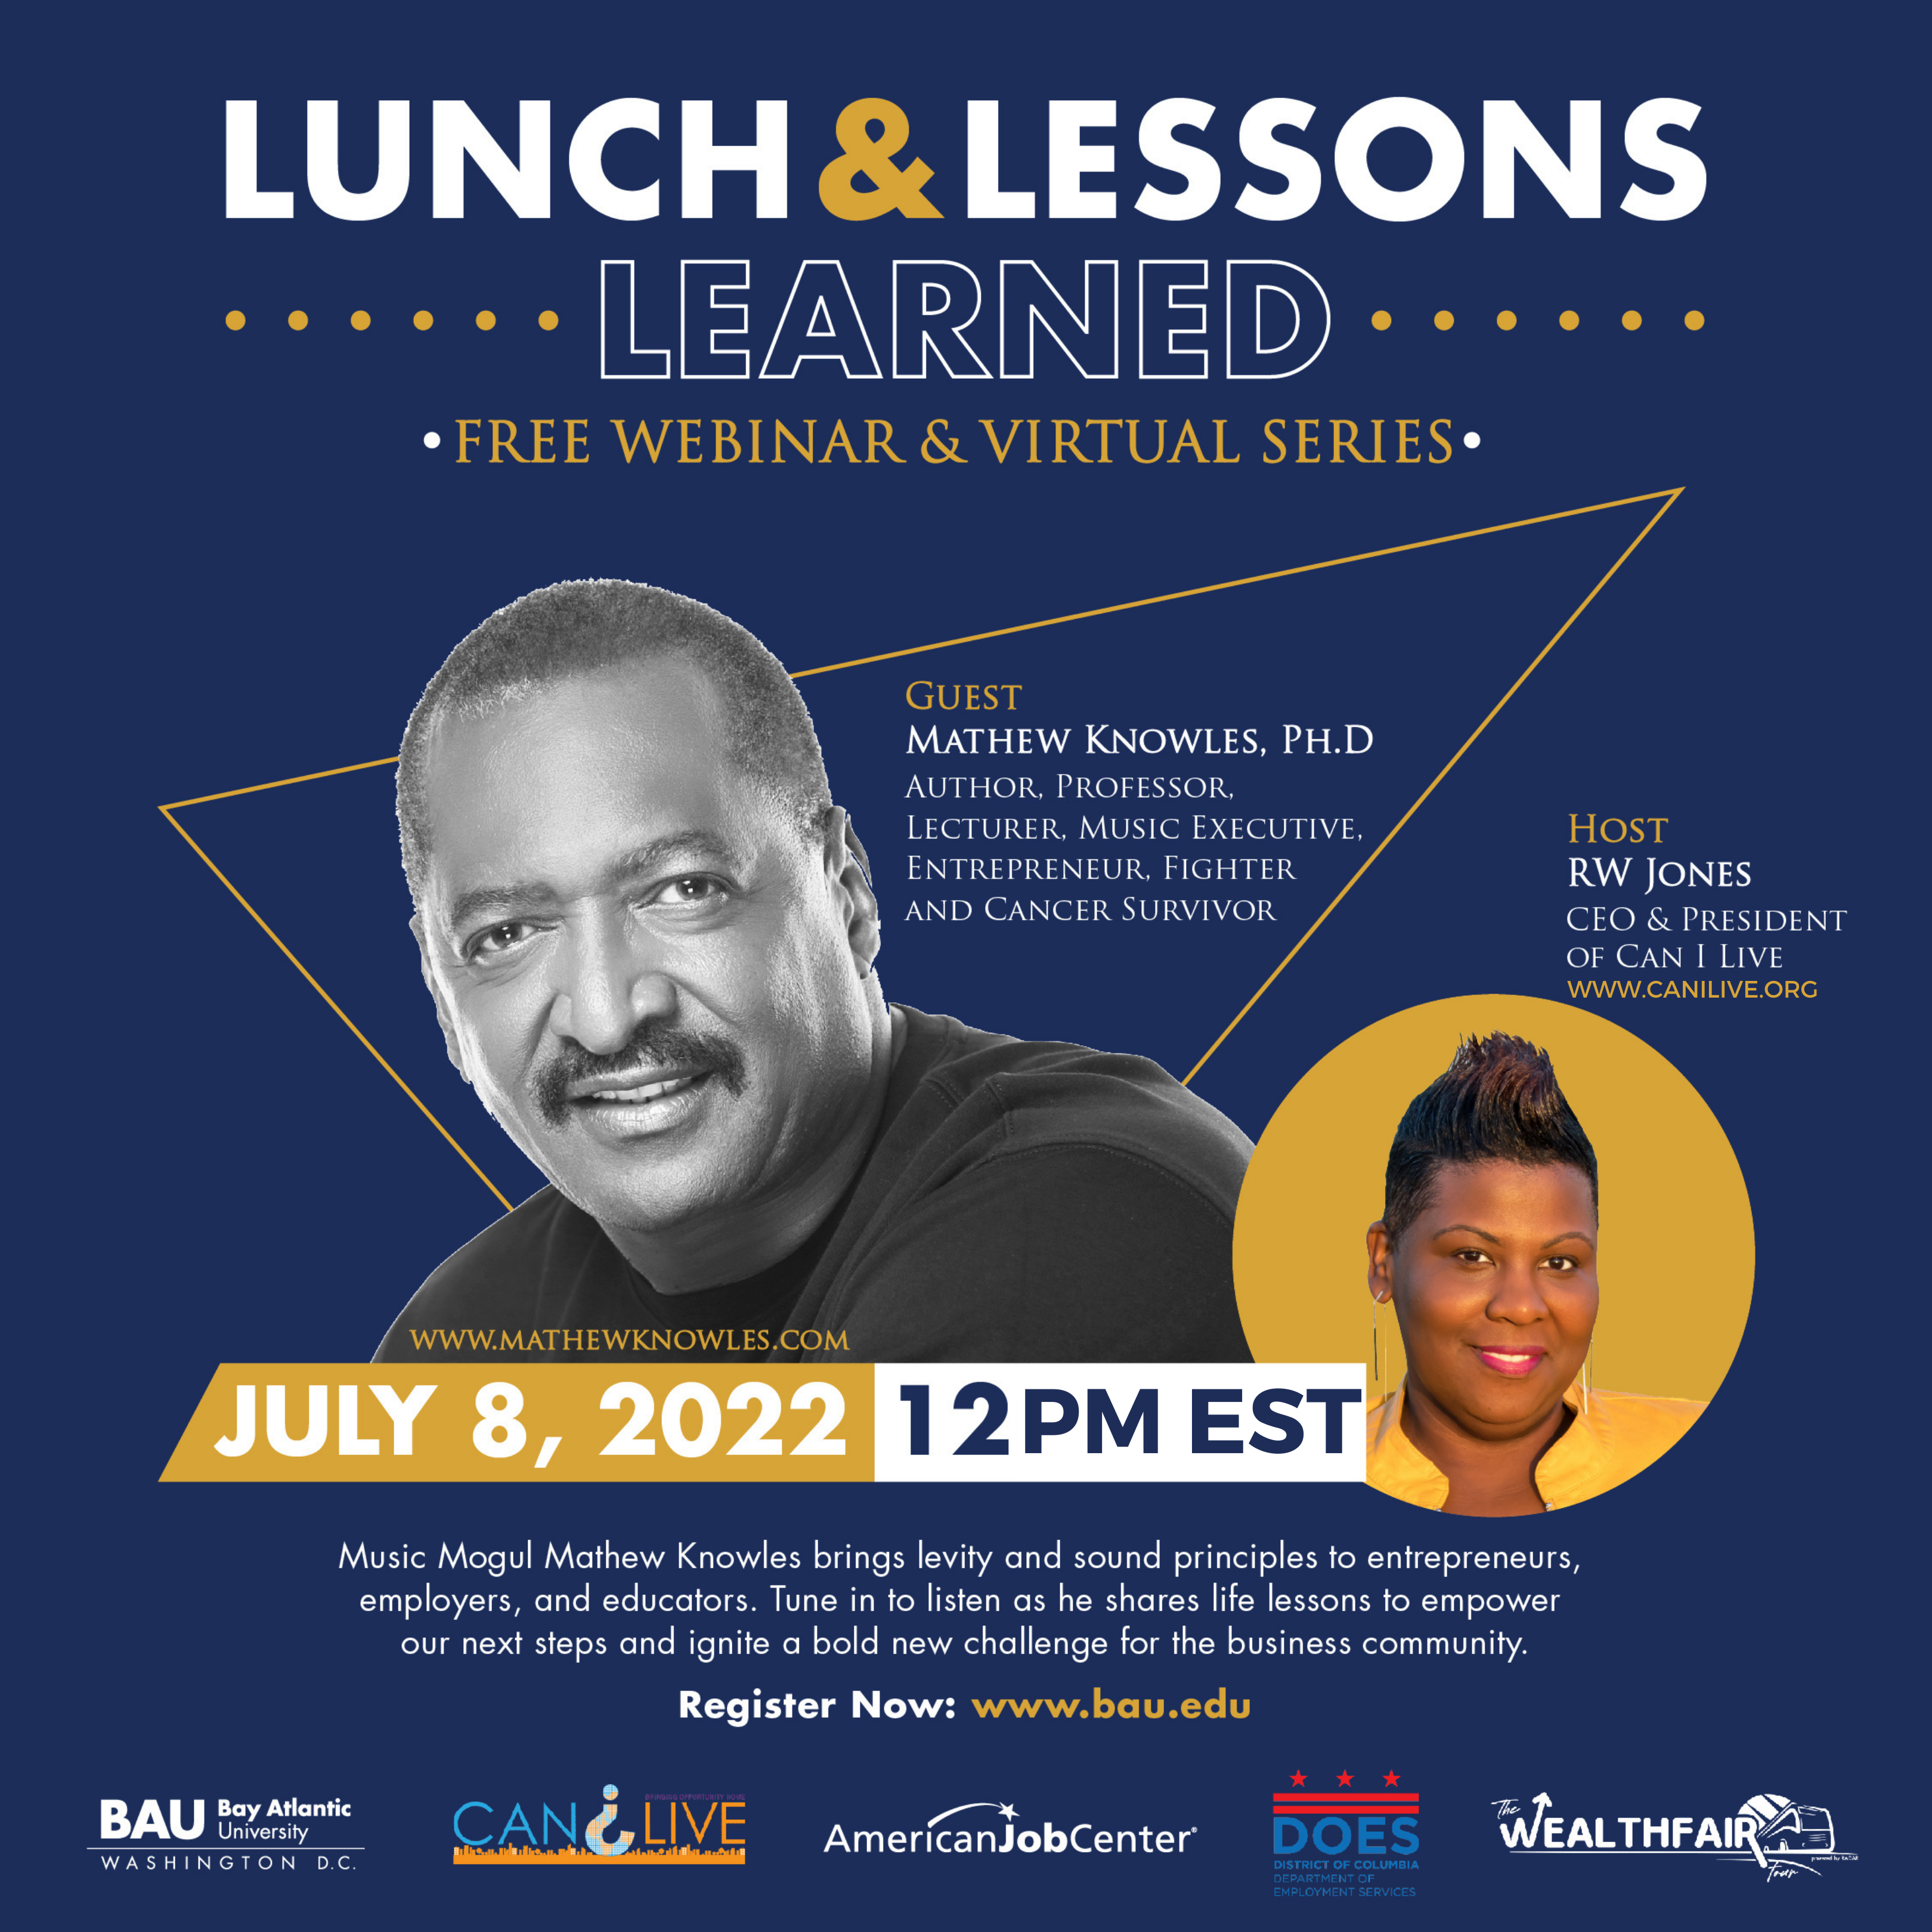 On a Mission to Move "One Million Moms OFF Welfare" Mathew Knowles, Ph.D. Joins the Effort with Founder of Can I Live, Inc. RW Jones at Upcoming Event